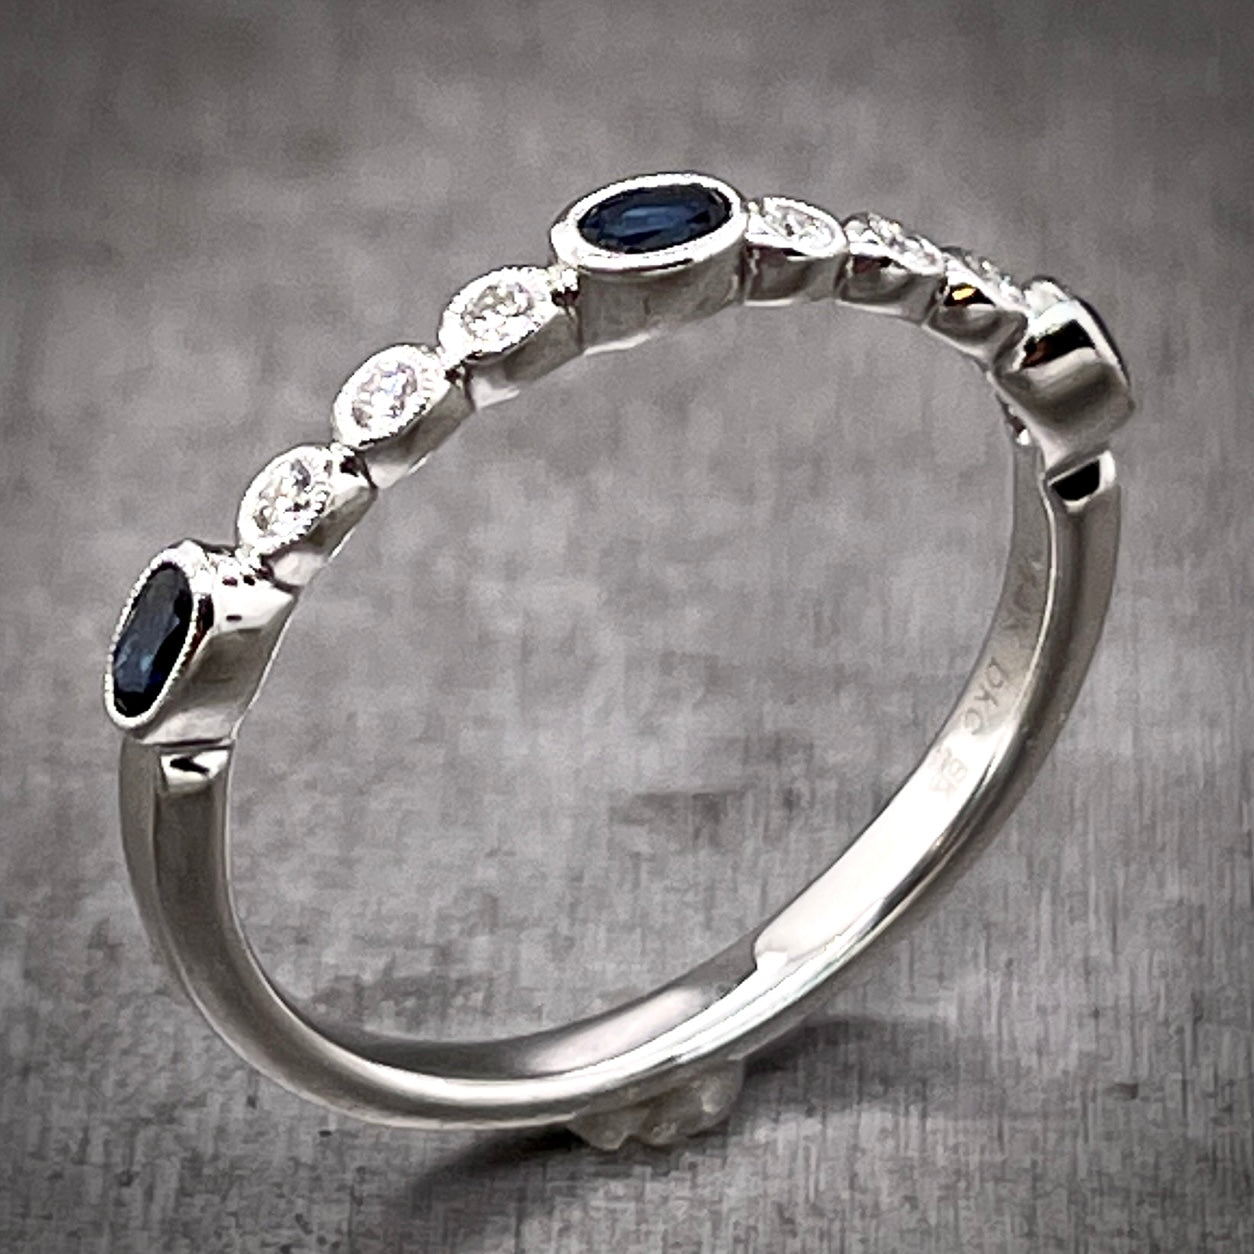 Angled aerial view of sapphire and diamond band. The three blue oval sapphires are spaced evenly across the top of the shank with three round diamonds in-between each sapphire. The stones only go around half of the shank. The bezels of each stone feature a beading detail on top of them.